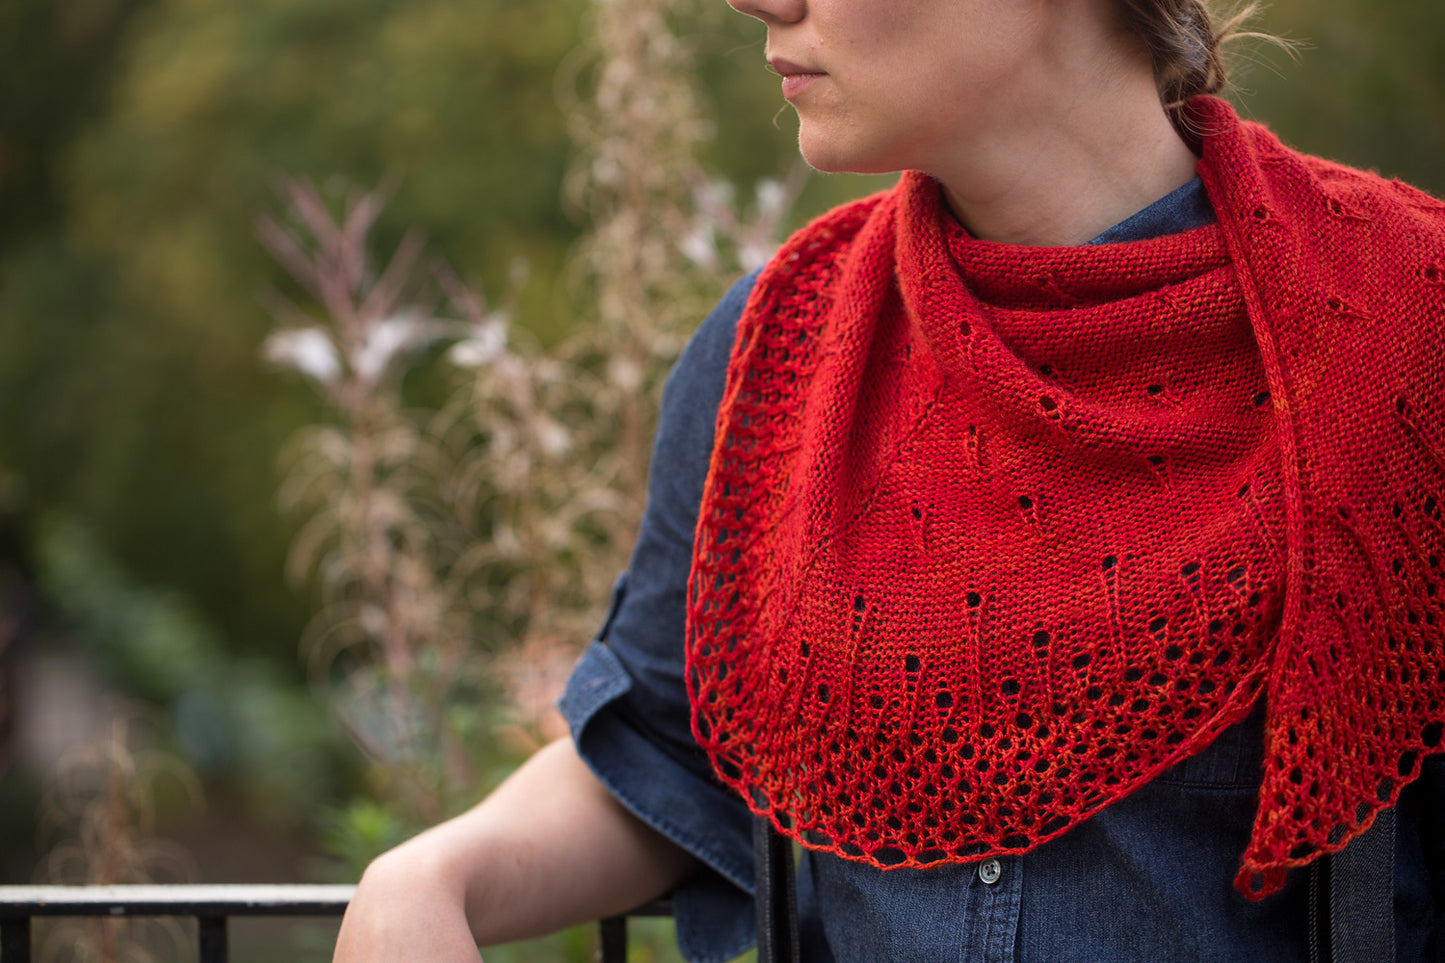 Shawl knitting pattern by Ysolda Teague, Carino and her step by step video